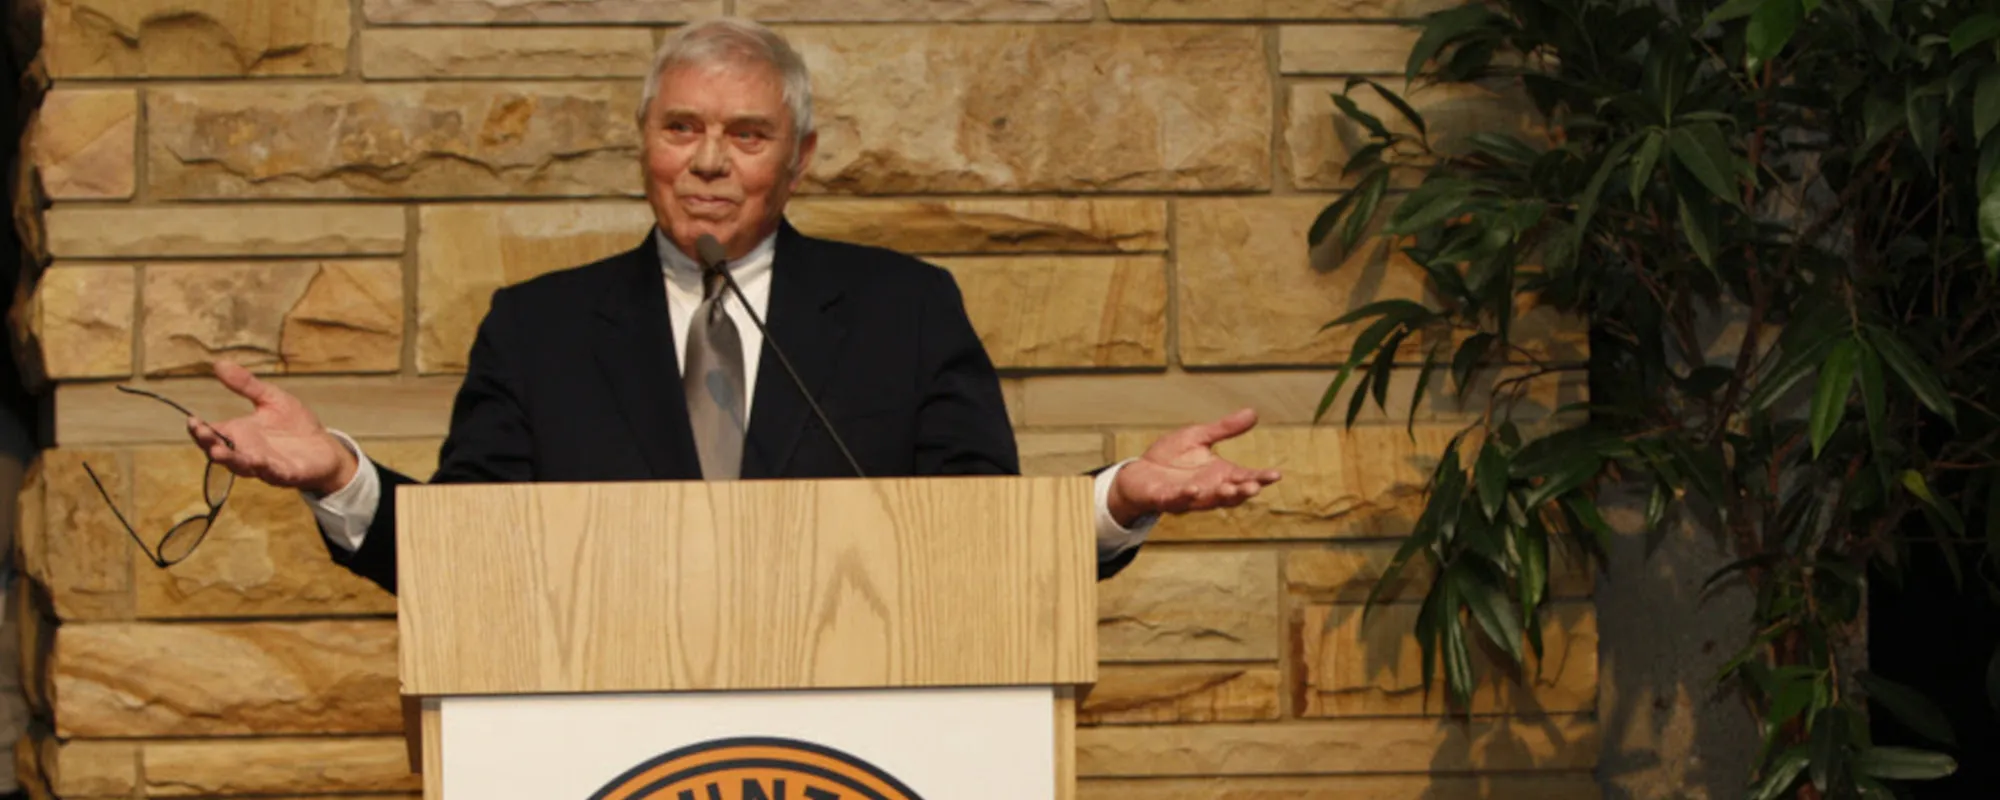 Tom T. Hall, Known as ‘The Storyteller,’ Dies at 85